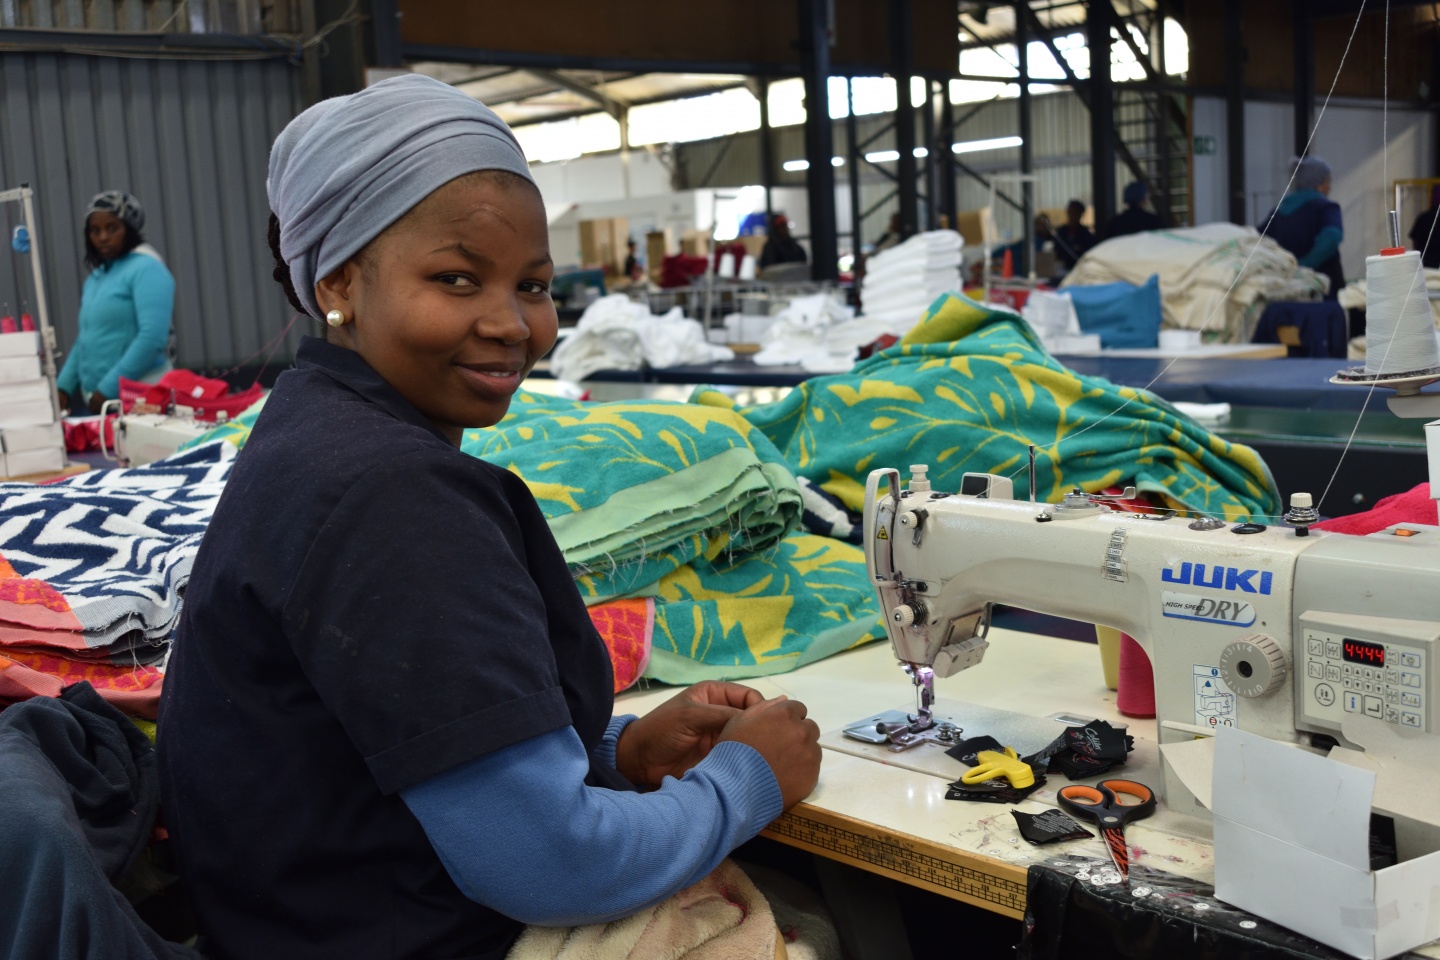 https://www.industriall-union.org/sites/default/files/styles/article_top_image_w1440/public/uploads/images/2021/SOUTH_AFRICA/Textile_Garment/dsc_0302.jpg?itok=r2us2hes